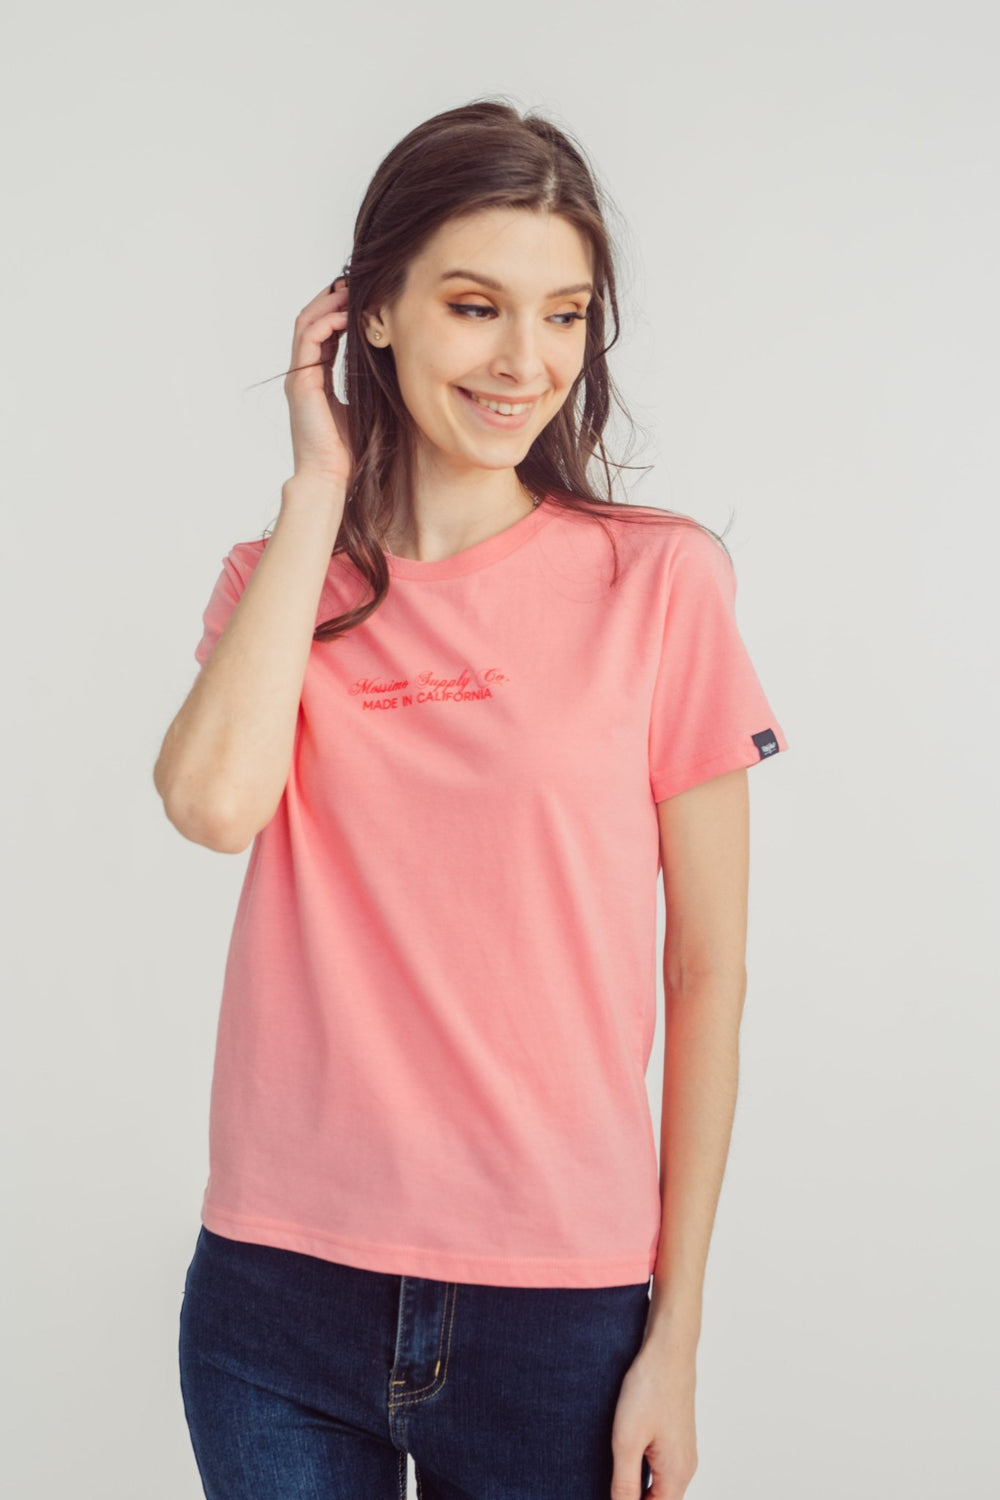 Geranium Pink with Mossimo Supply Co. Made in California Classic Fit Tee - Mossimo PH